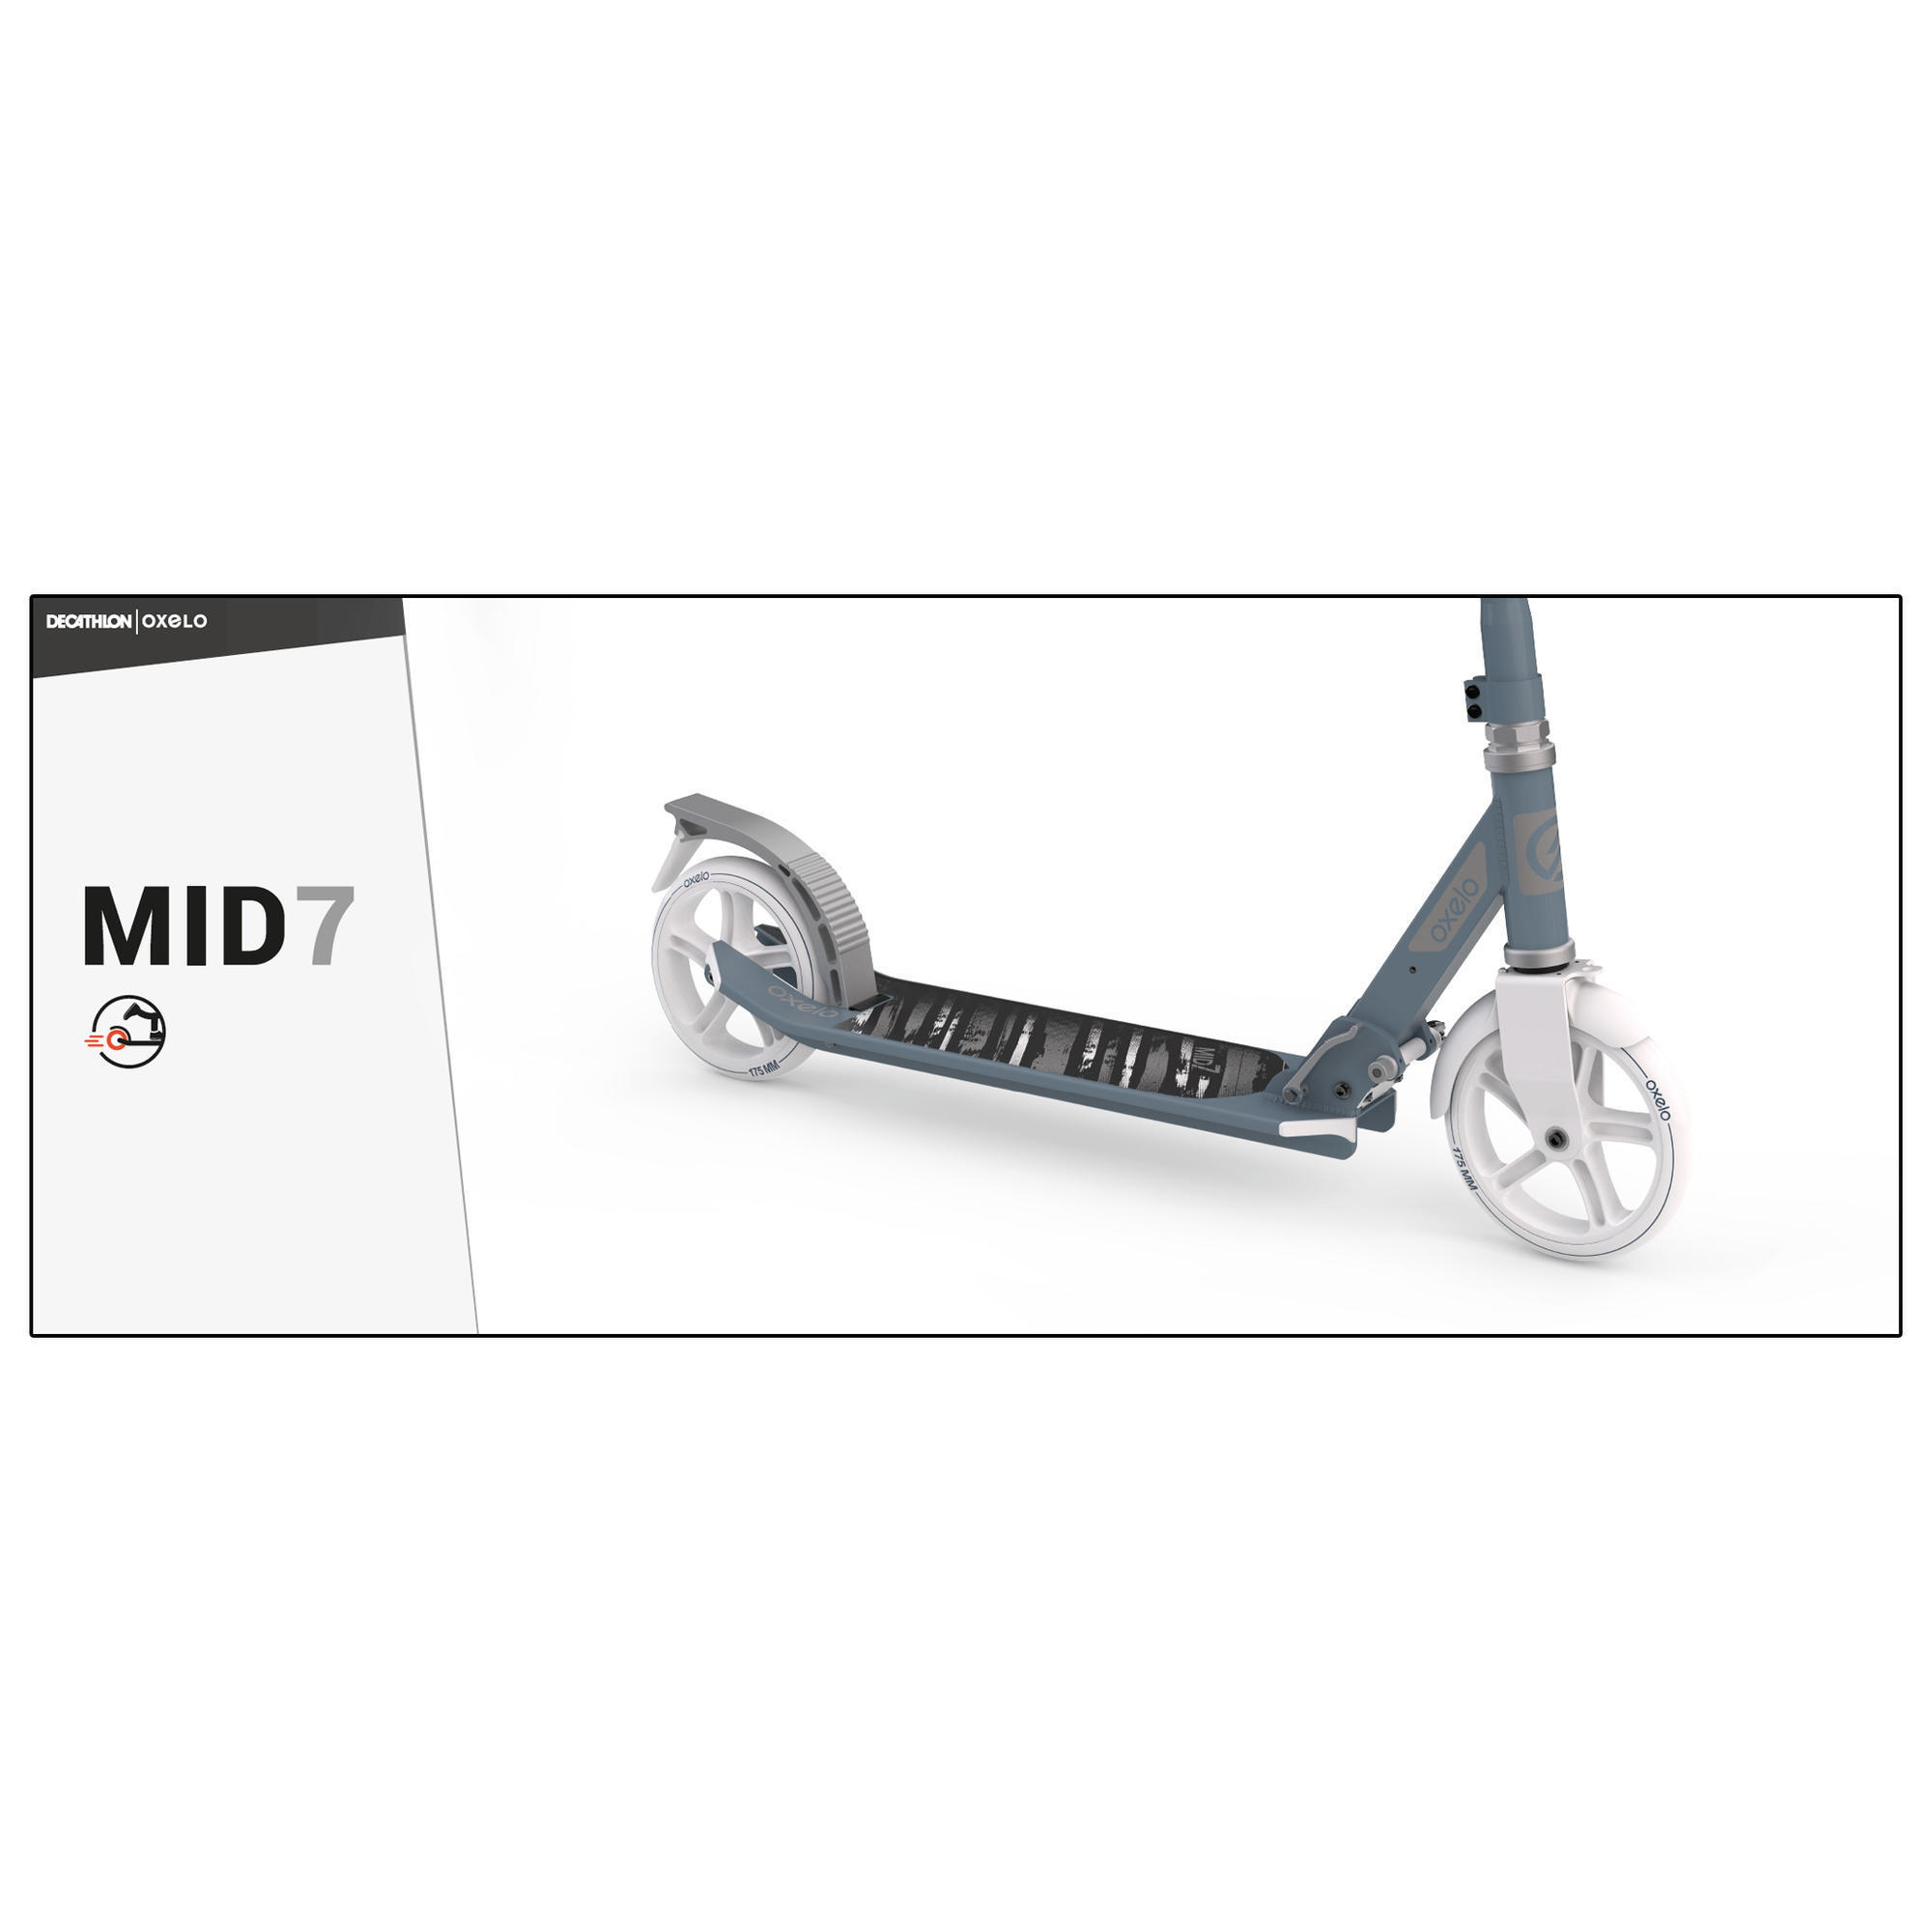 Mid 7 Scooter OXELO - Decathlon